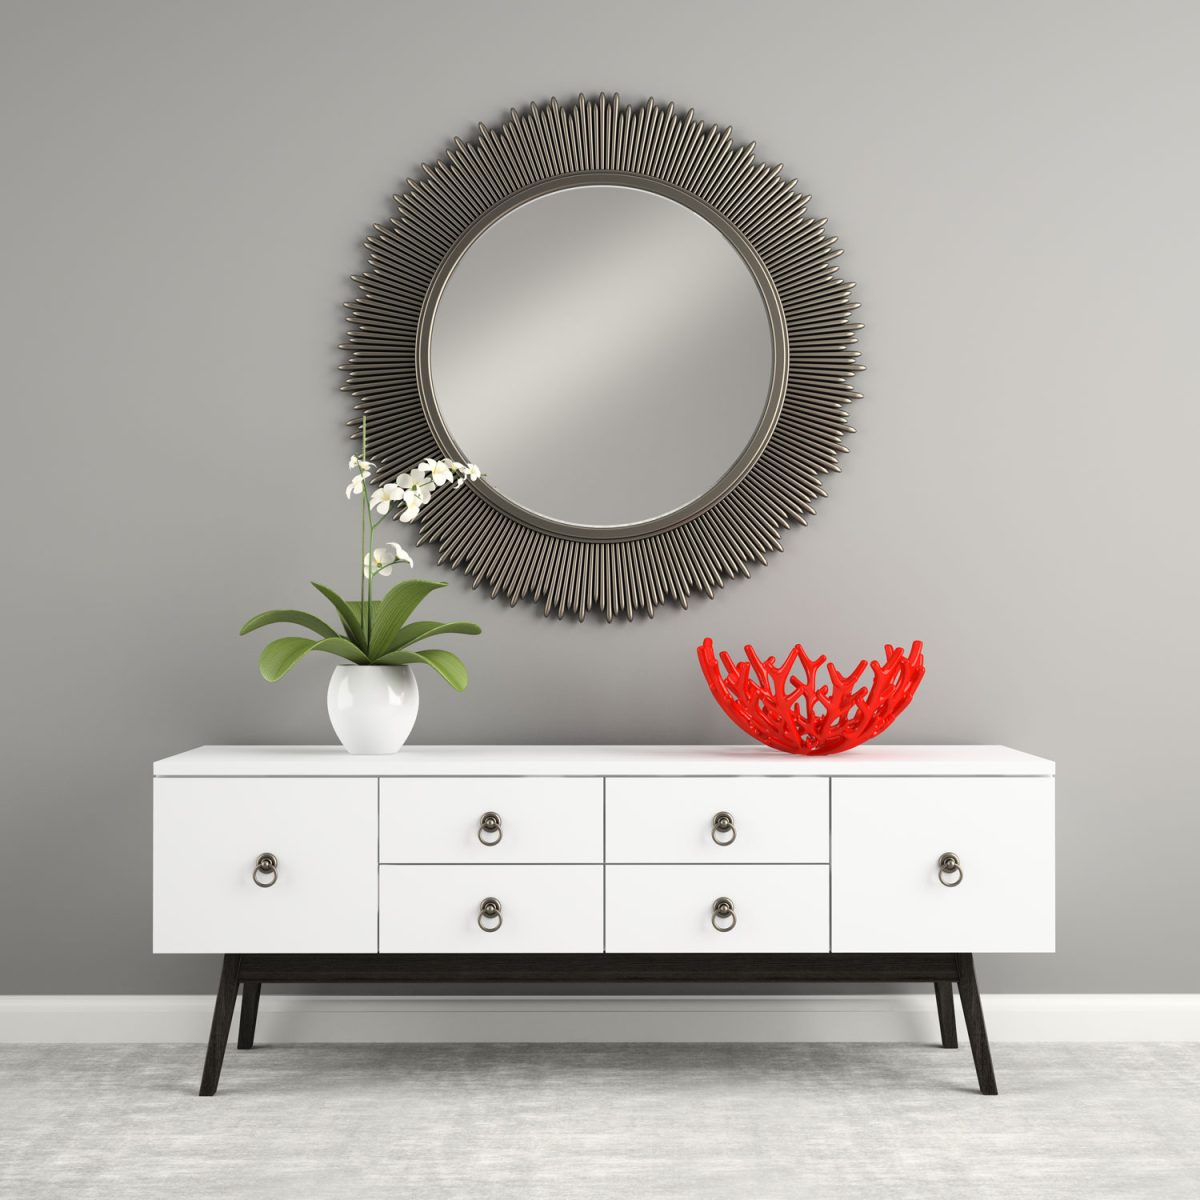 A round mirror and matched with a white console table